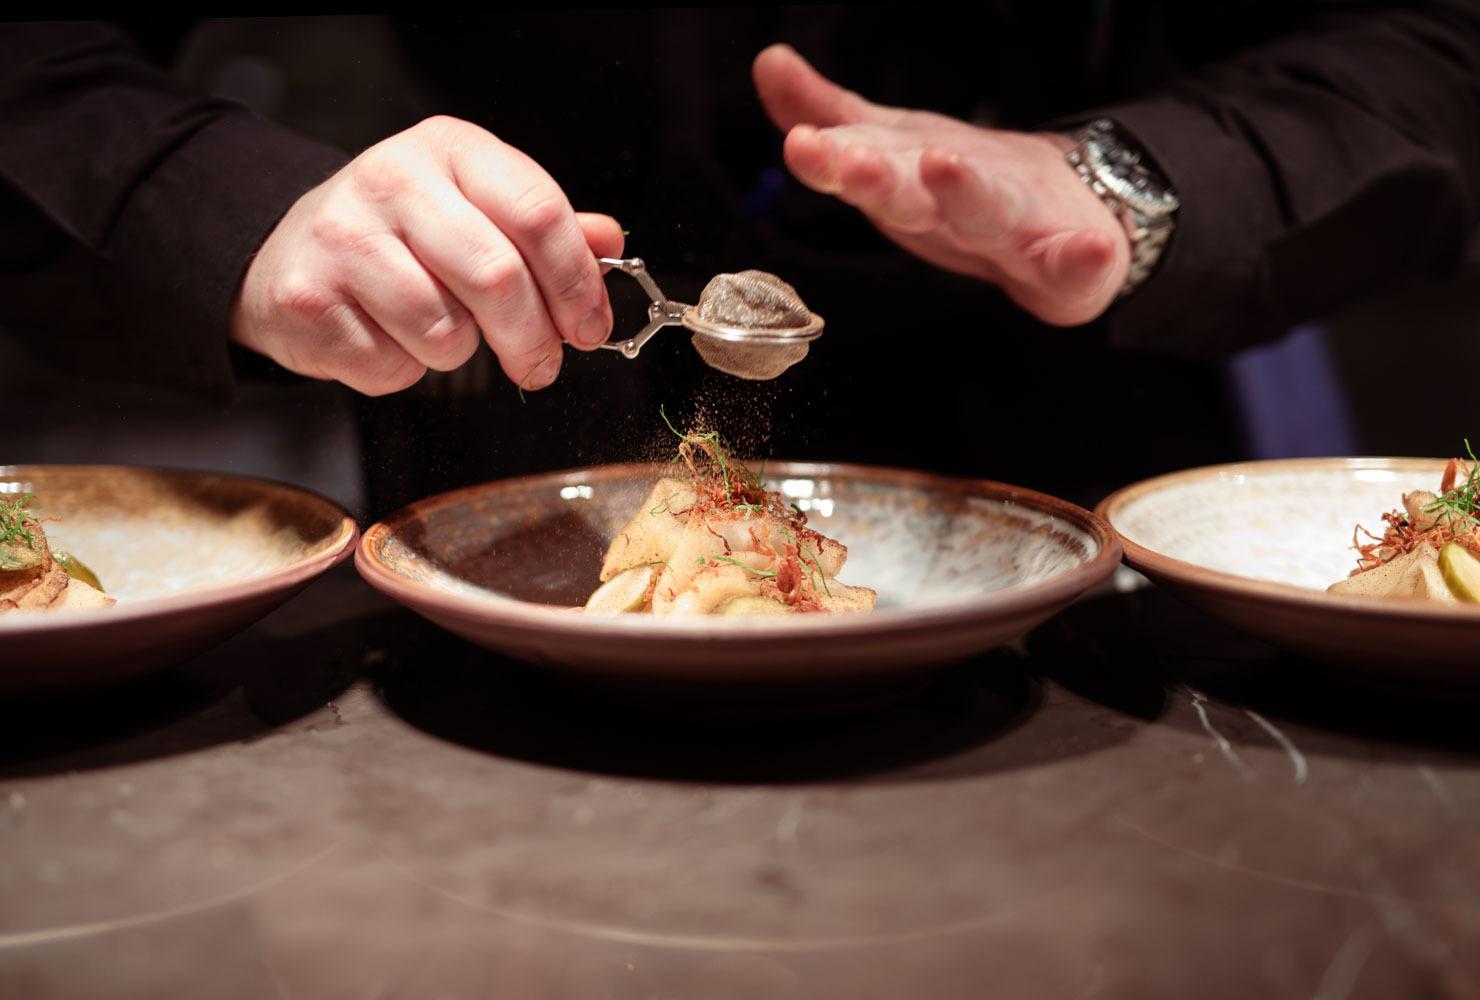 A close-up of two hands dusting a powder over a dish.